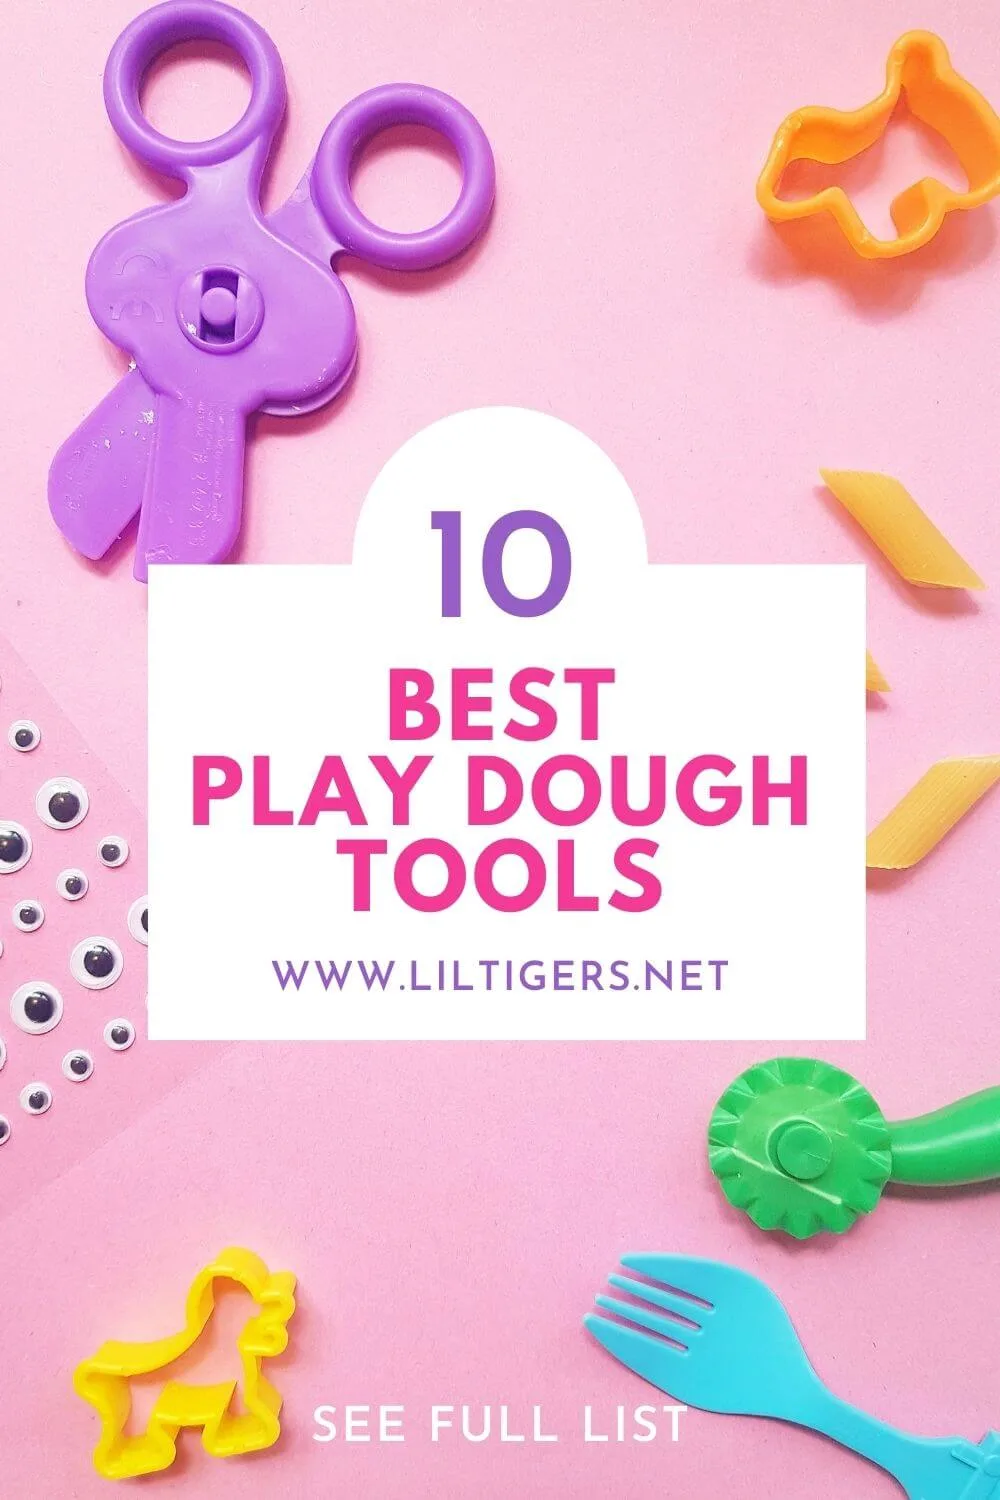 10 Best Play Dough tools